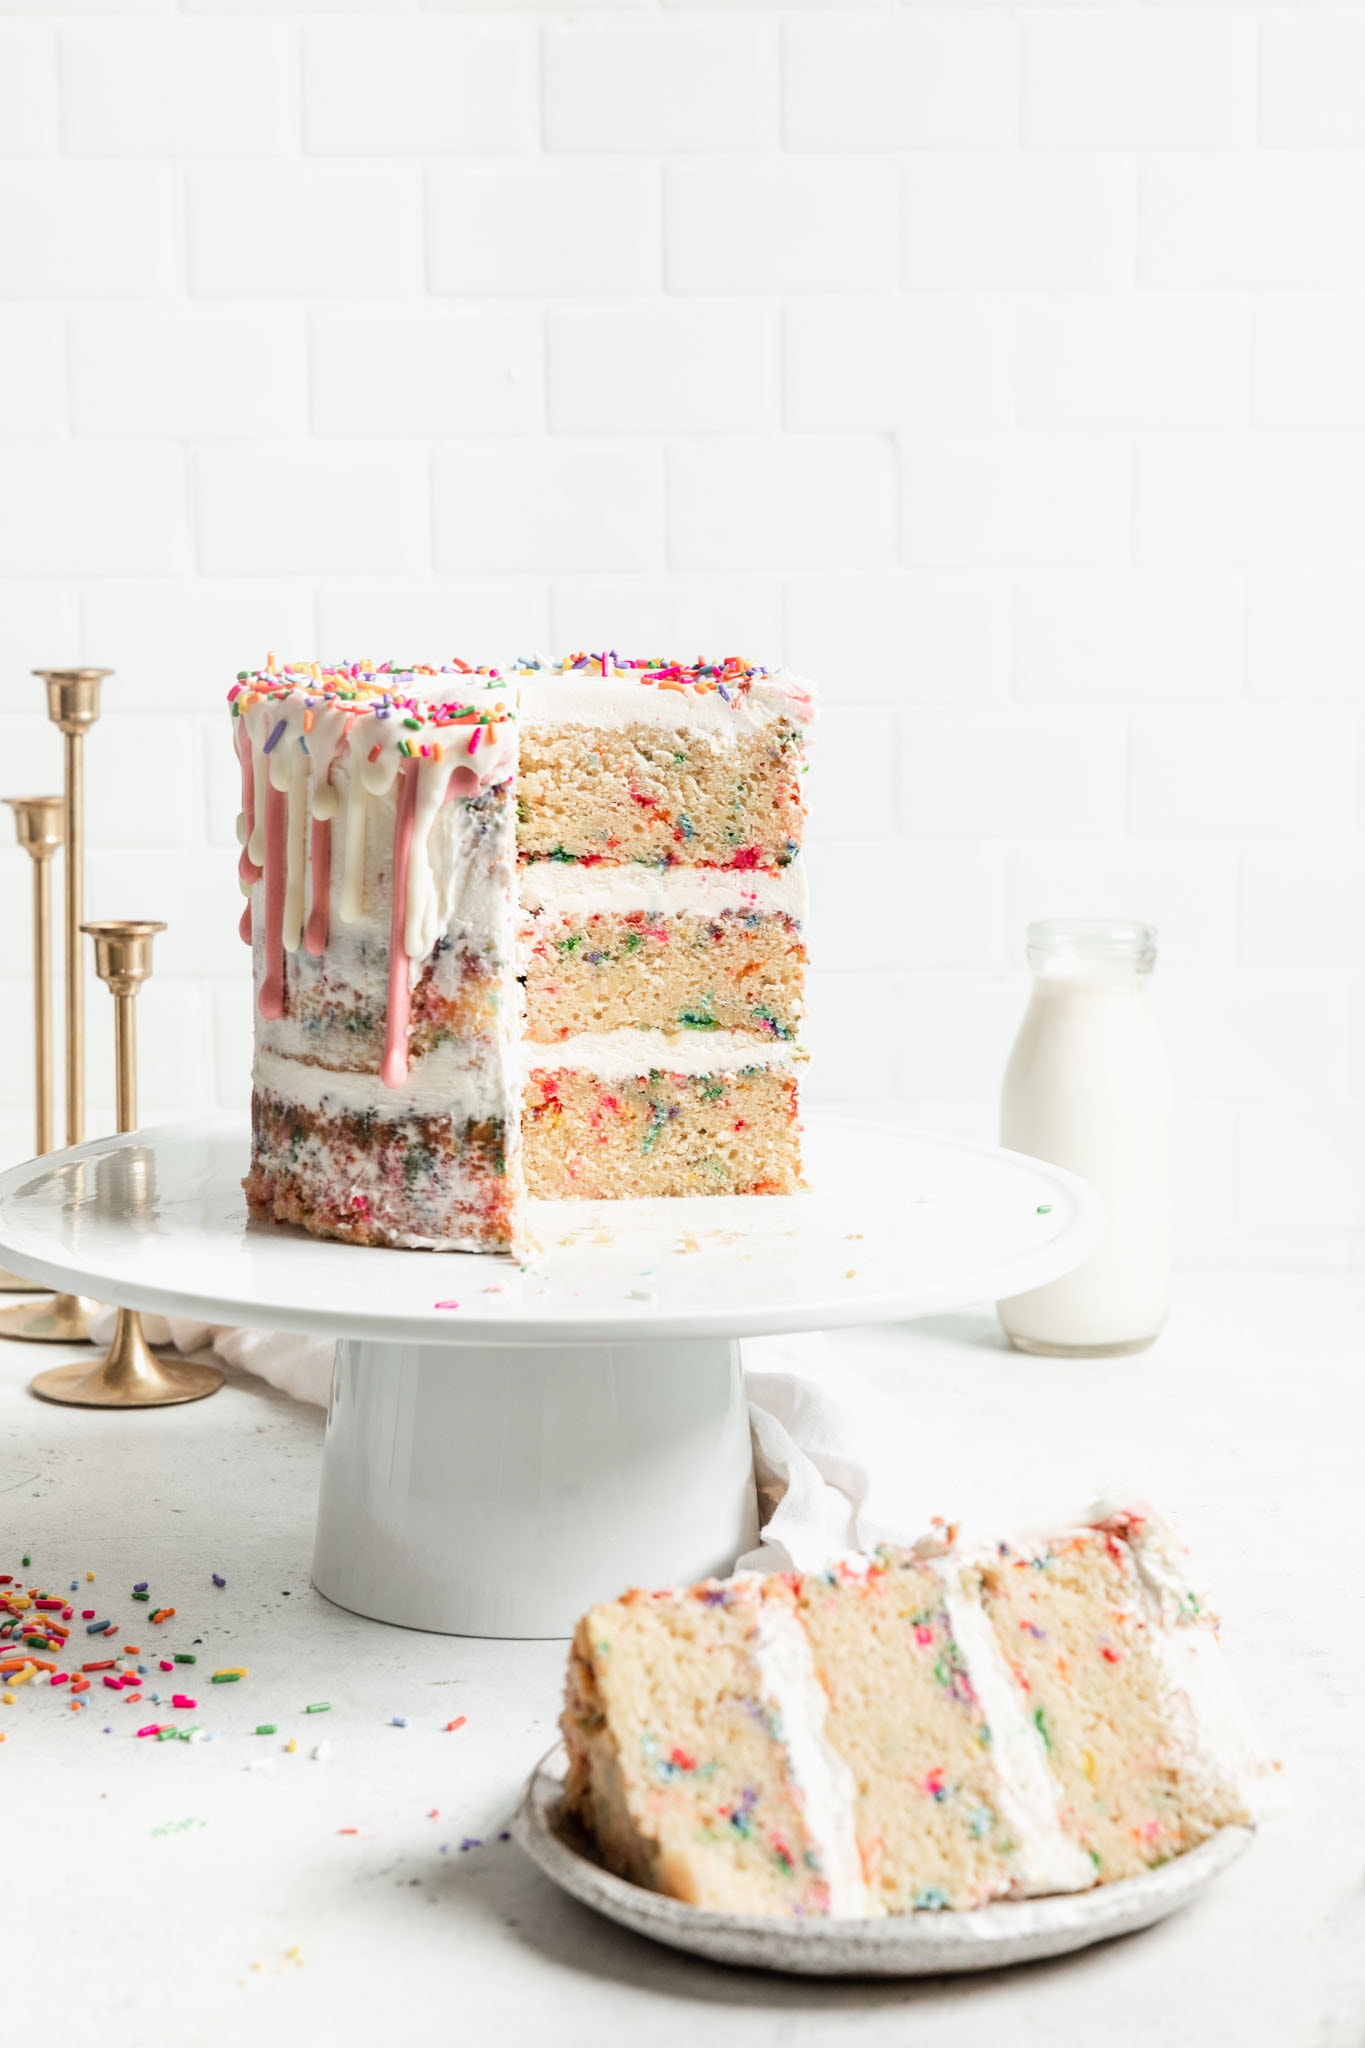 The best homemade funfetti cake recipe! Tastes even better than the pillsbury cake mix and makes the perfect birthday cake.